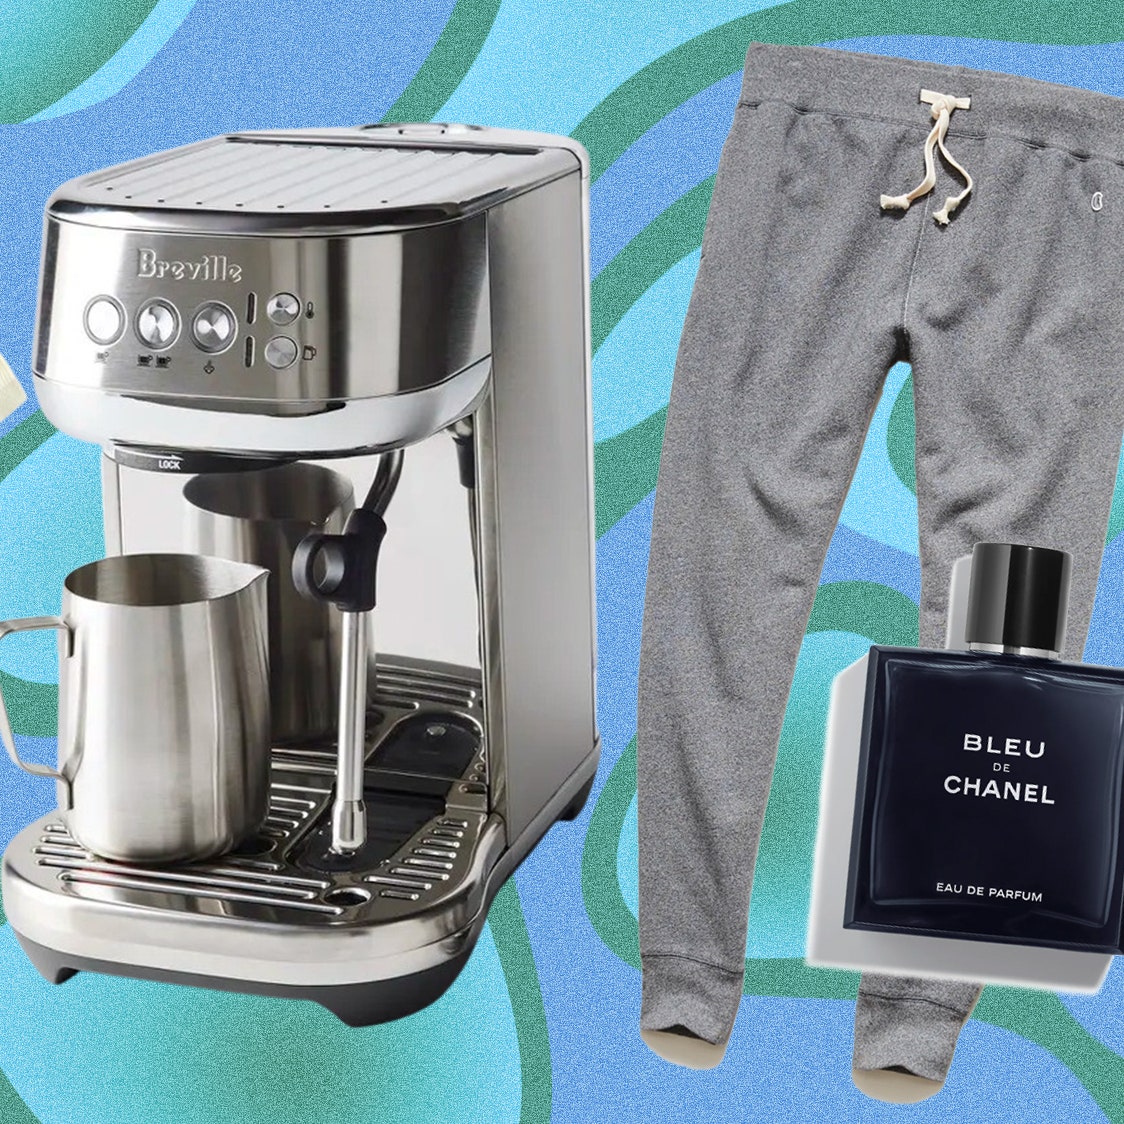 73 Excellent Gift Ideas to Spoil All the Deserving Guys Out There